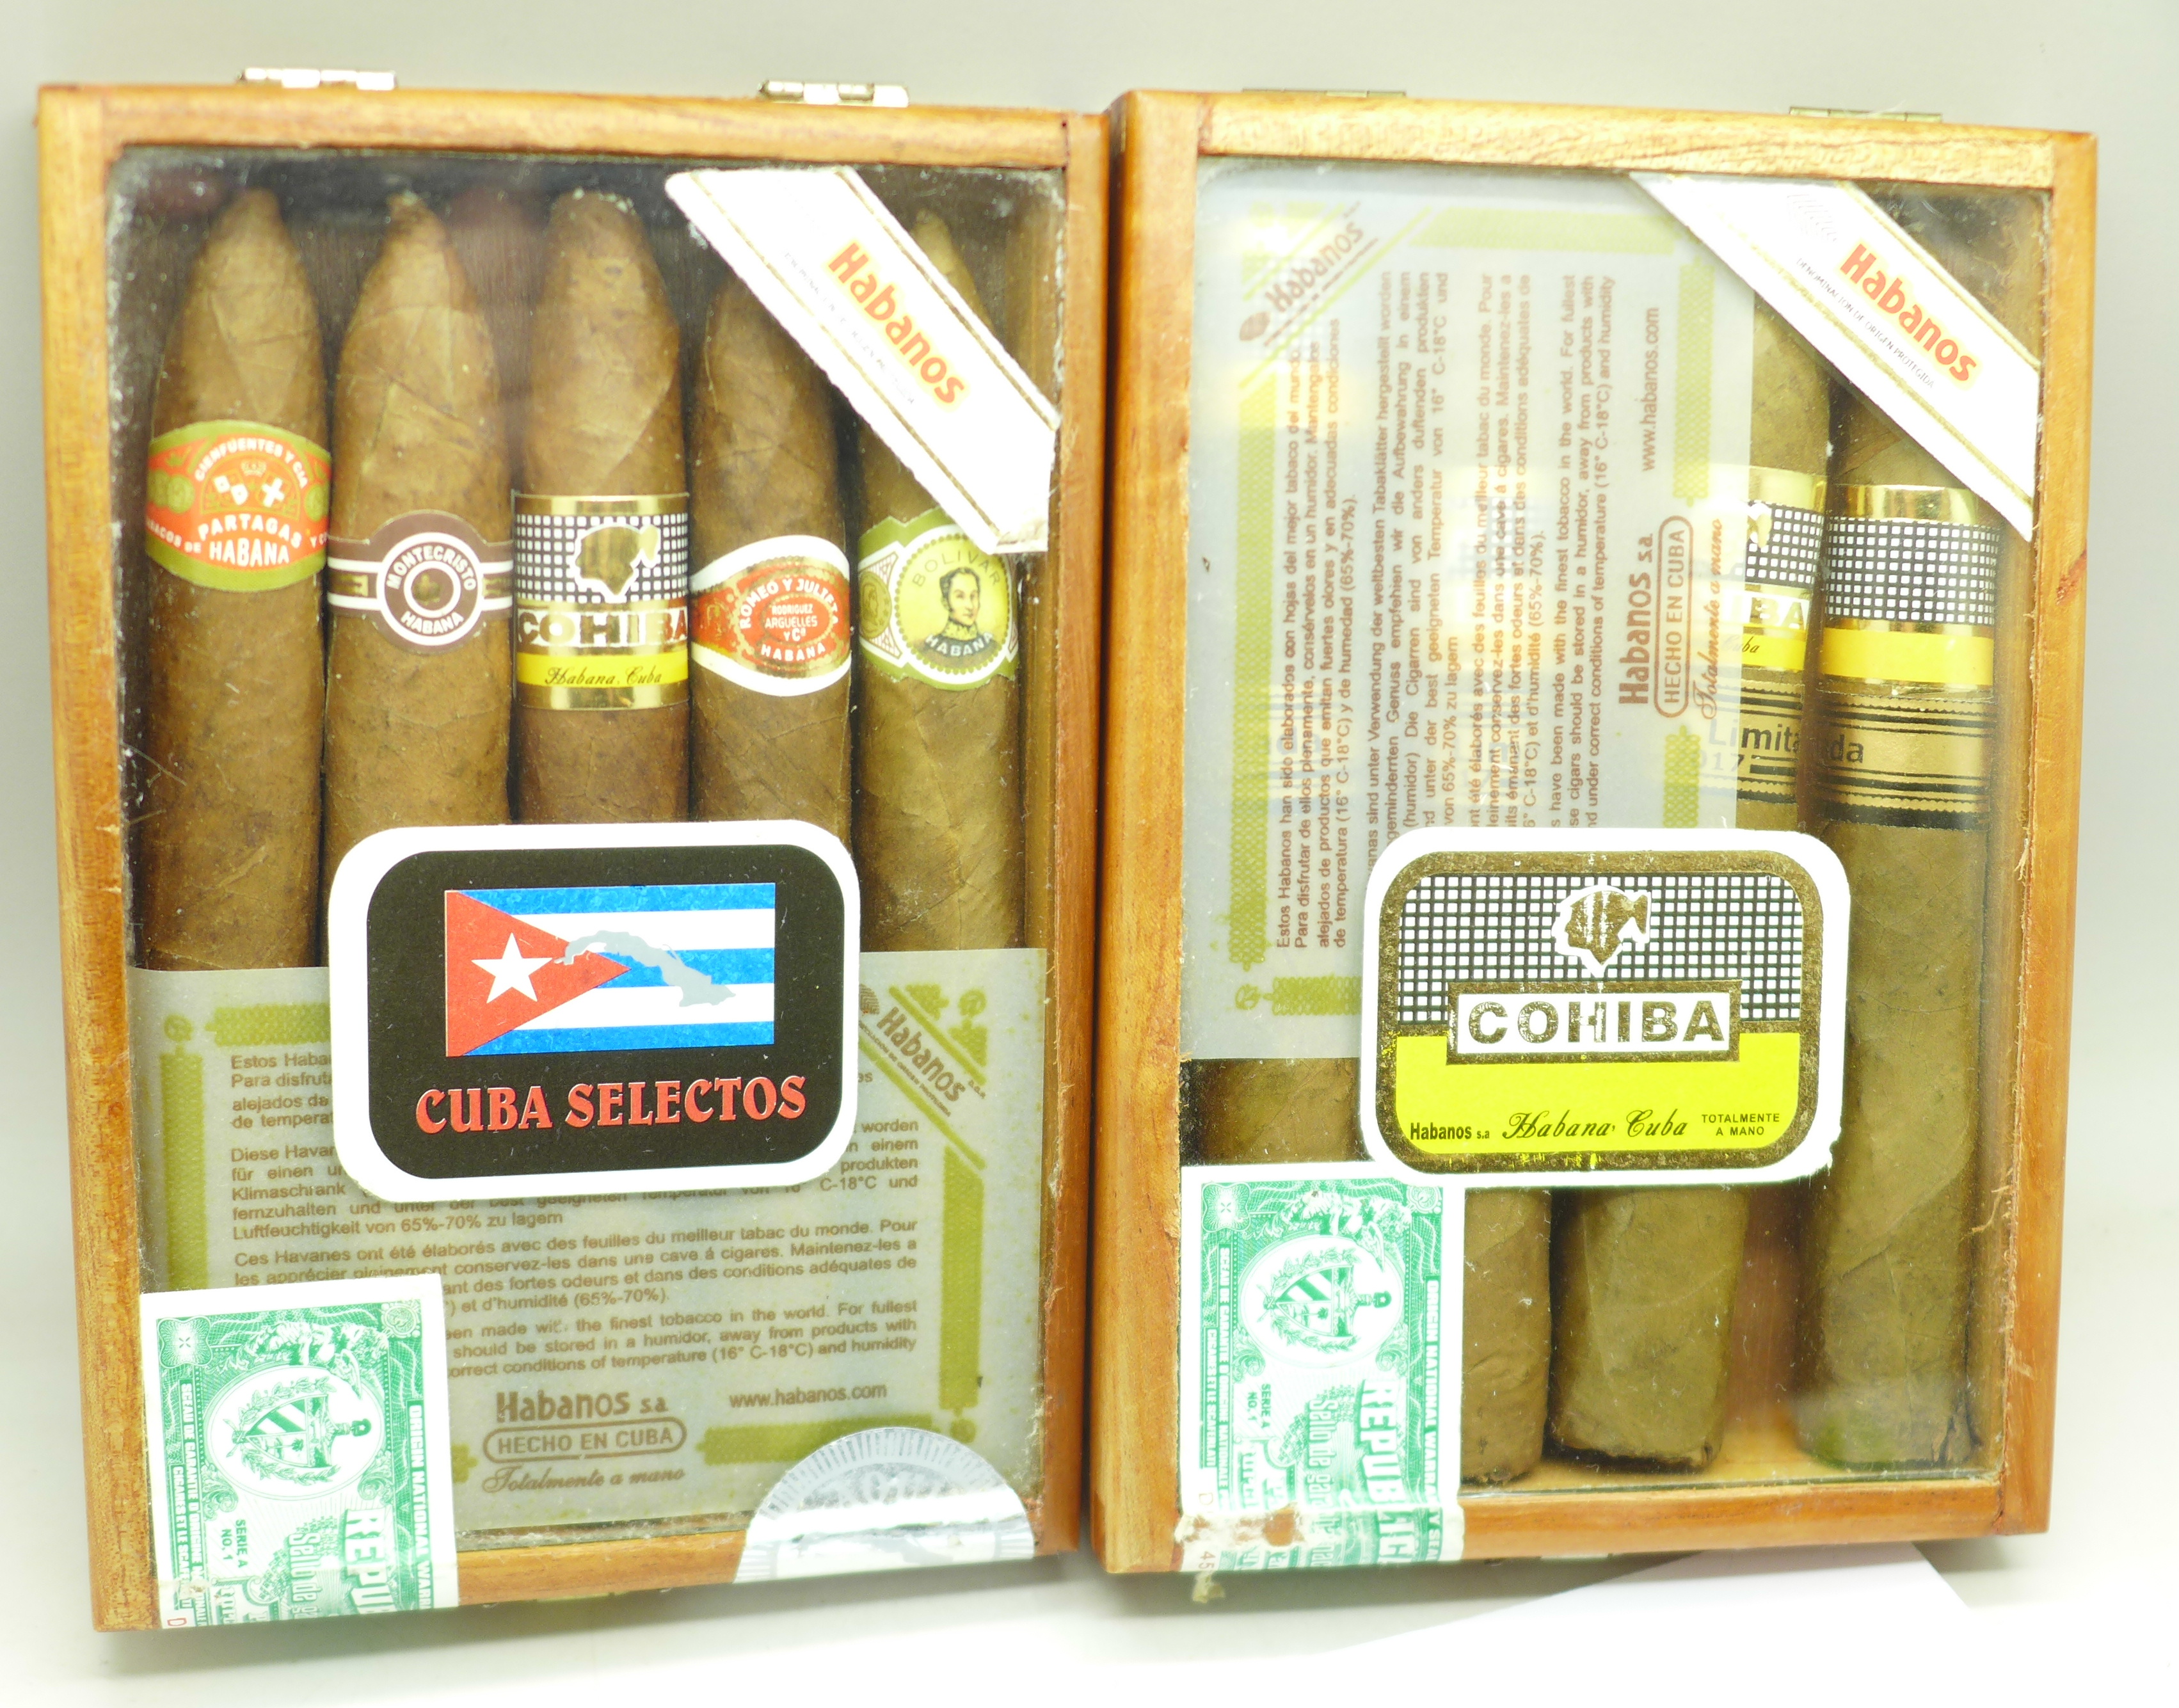 Two boxes of Cuban cigars, one box of five Cuba Selectos, sealed, and one opened box with four